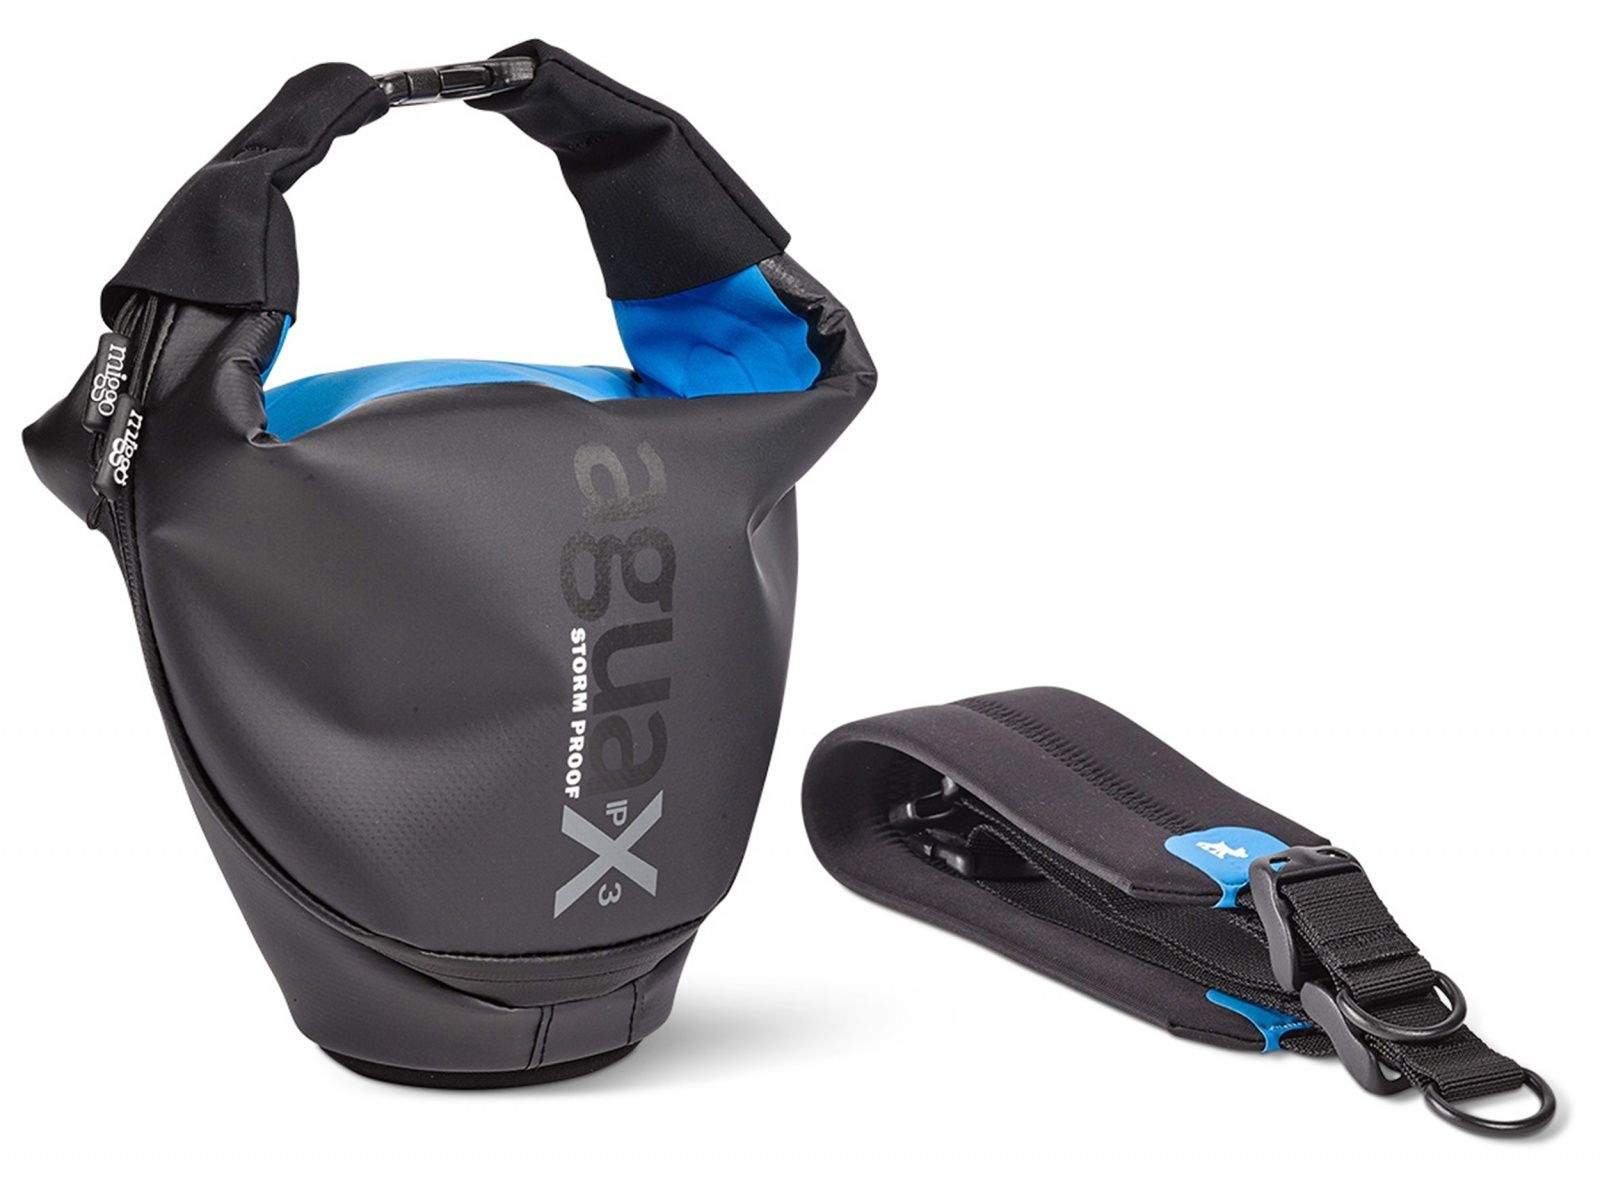 The designers of the Agua bag say it will keep a camera and small lens dry in any weather.